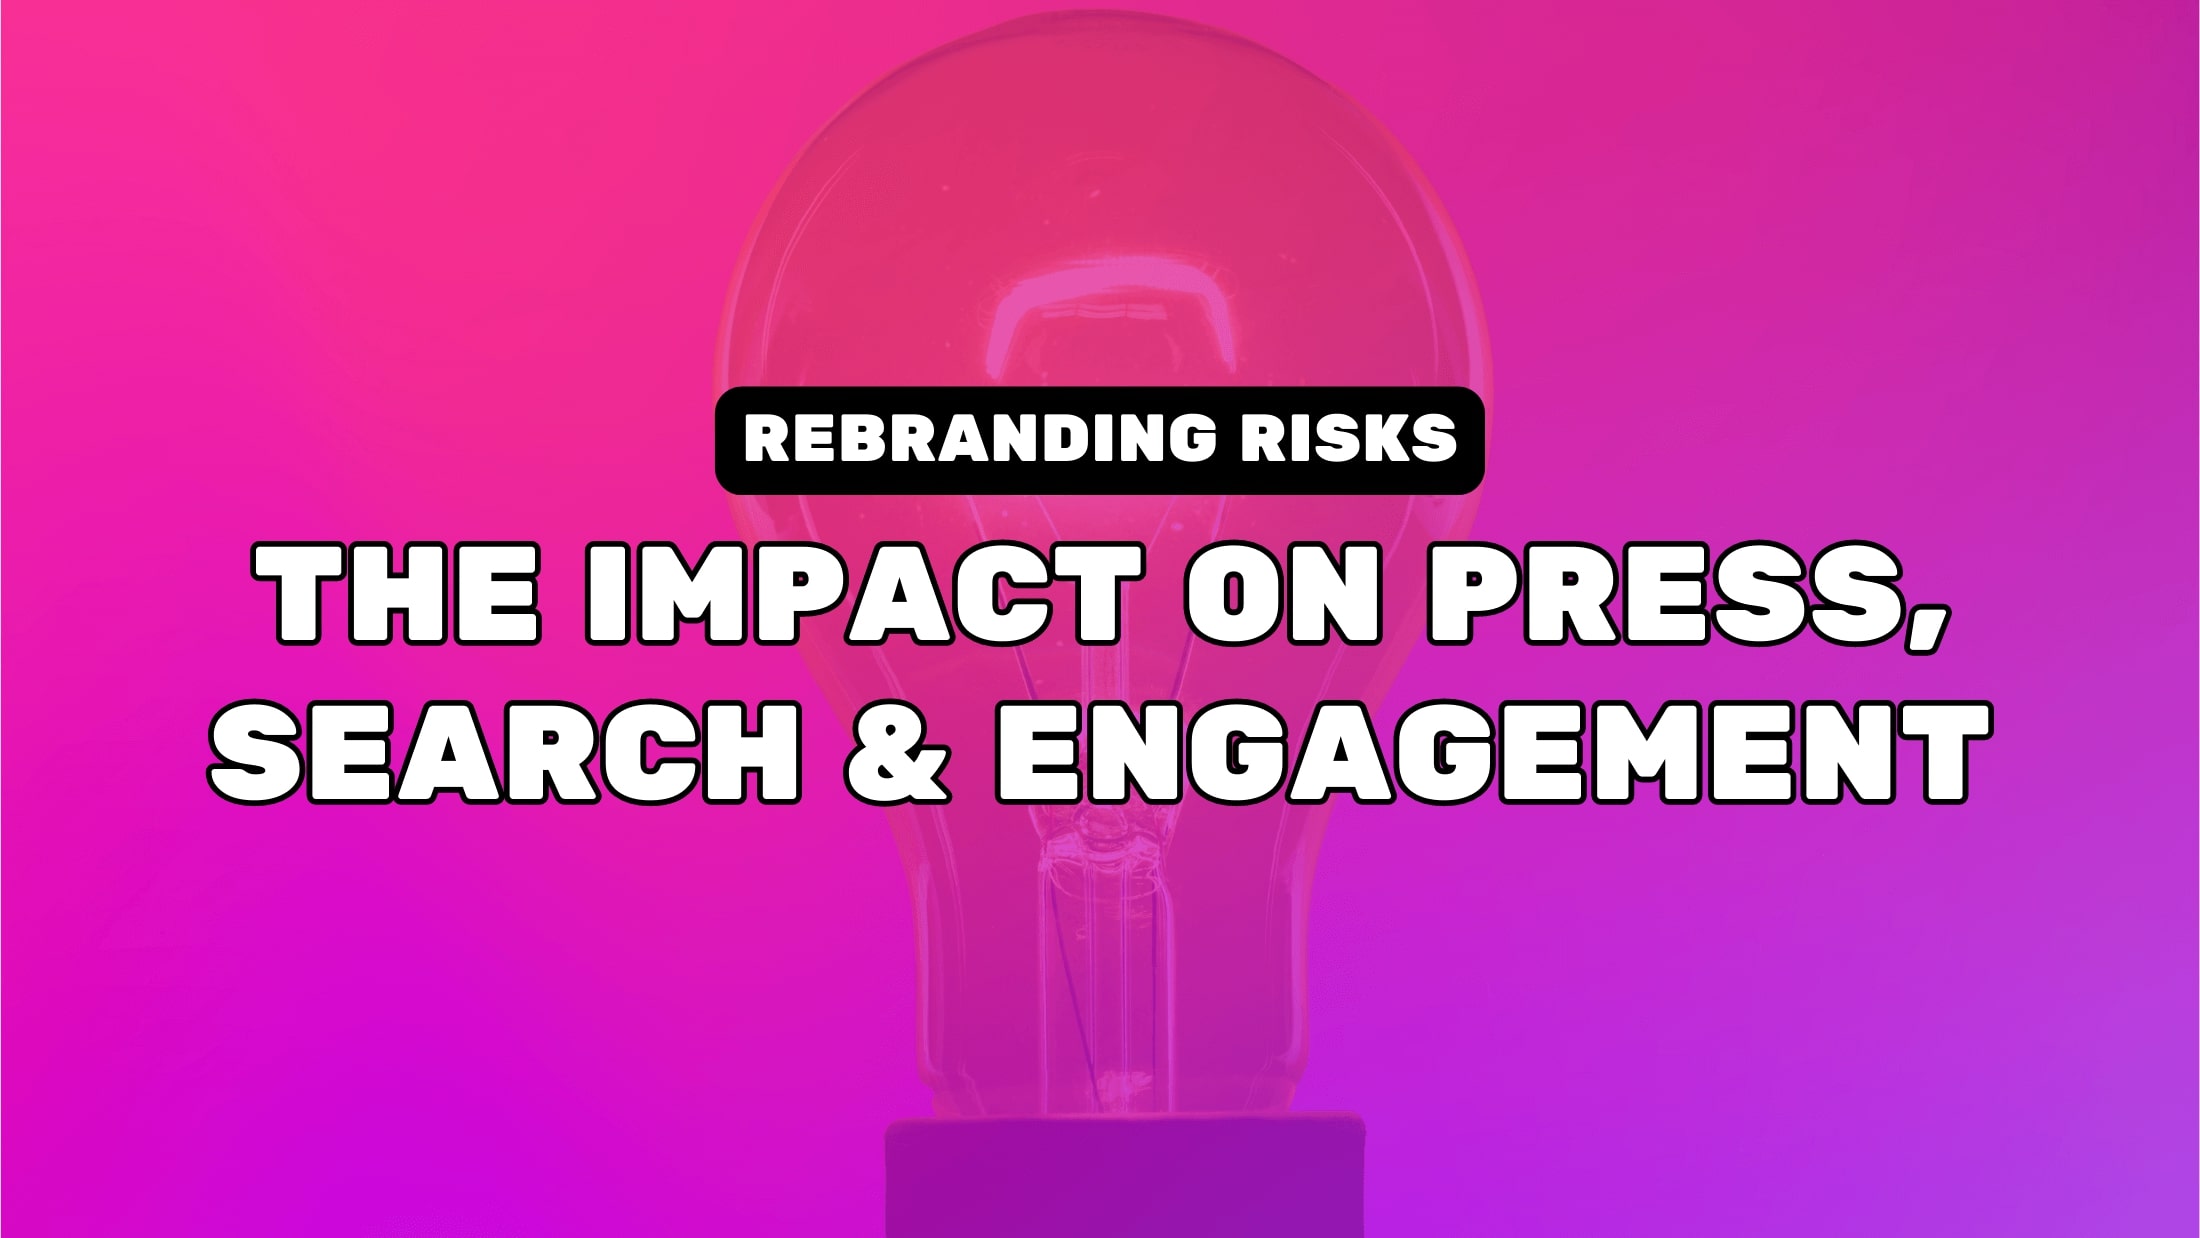 Rebranding Risks: The Impact on Press, Search & Engagement